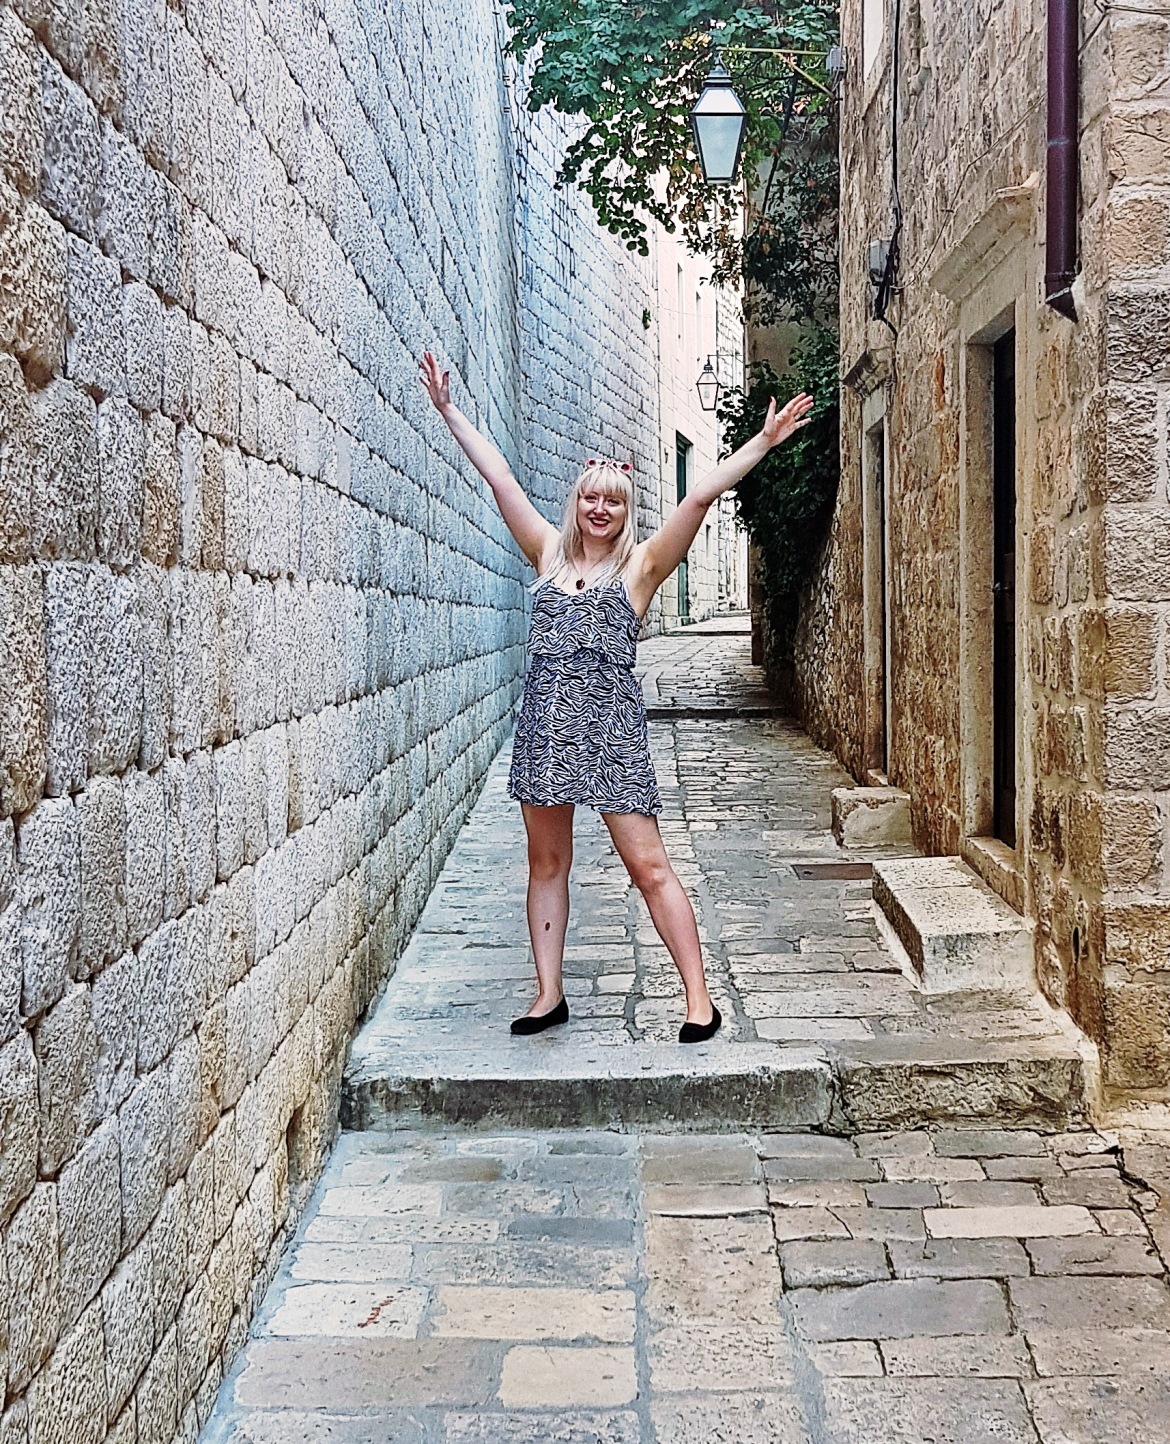 Exploring the Old Town - Sightseeing in Dubrovnik, Croatia - Top Travel Tips by BeckyBecky Blogs